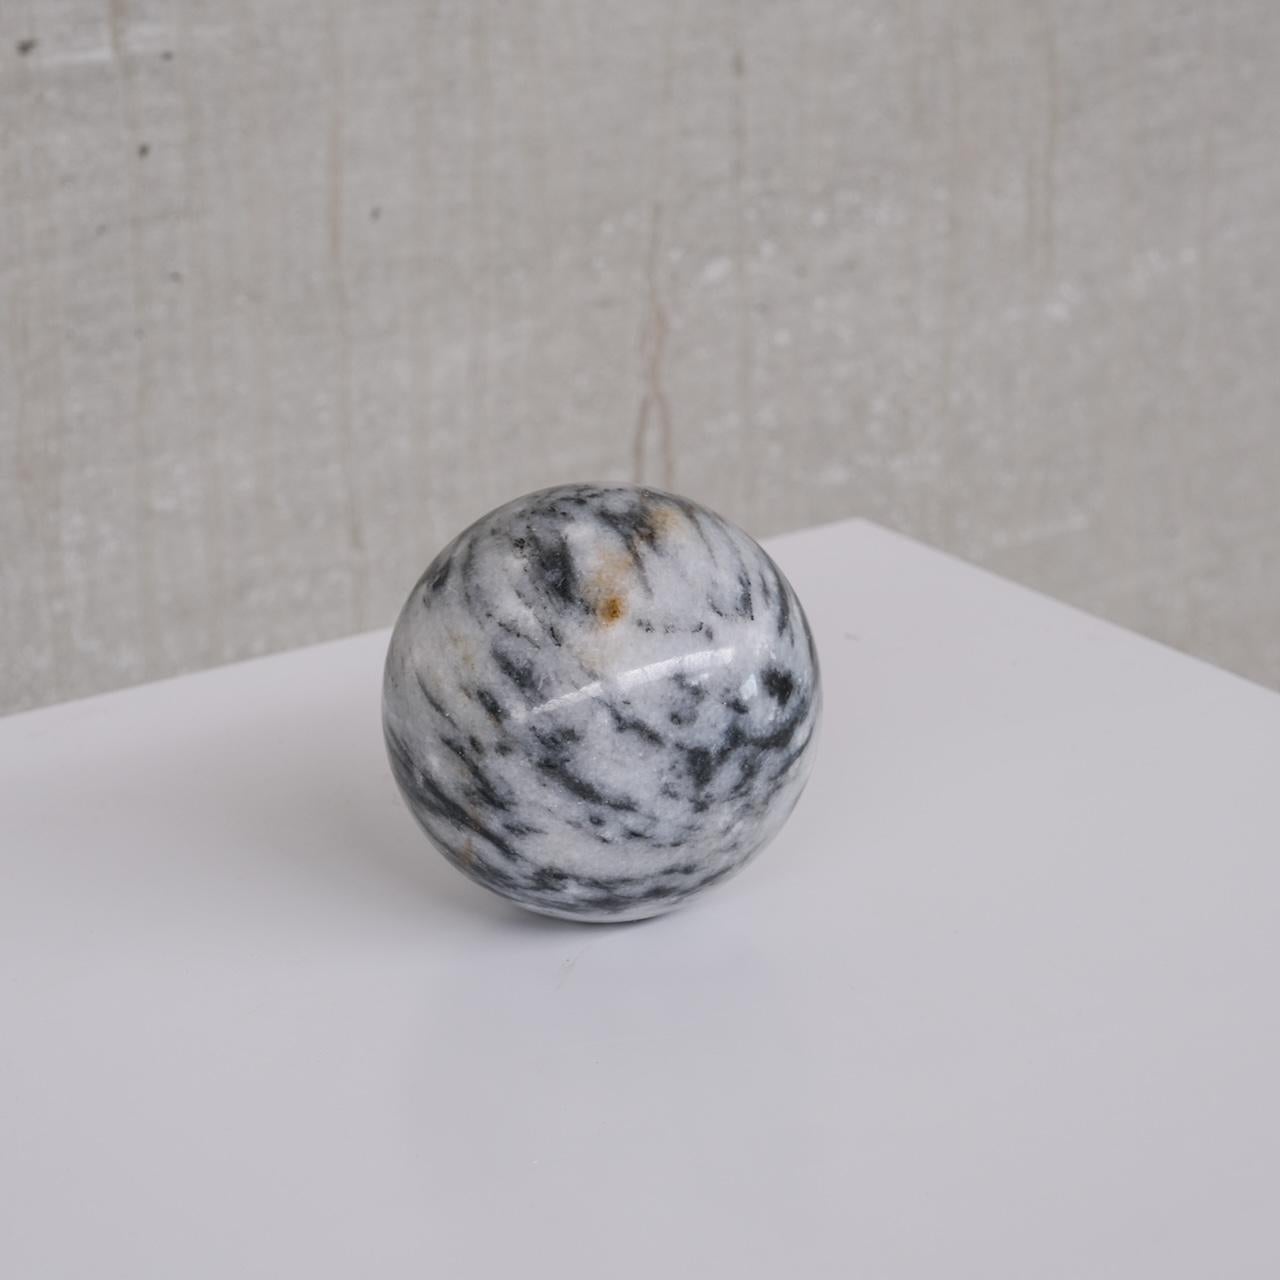 A small solid marble ball.

Italy, c1970s.

Ideal desk or shelf geometric curio.

Tactile objet.

Vintage condition, occasional scuff commensurate with age.

Location: Belgium Gallery.

Dimensions: 11 Diameter in cm.

Delivery: